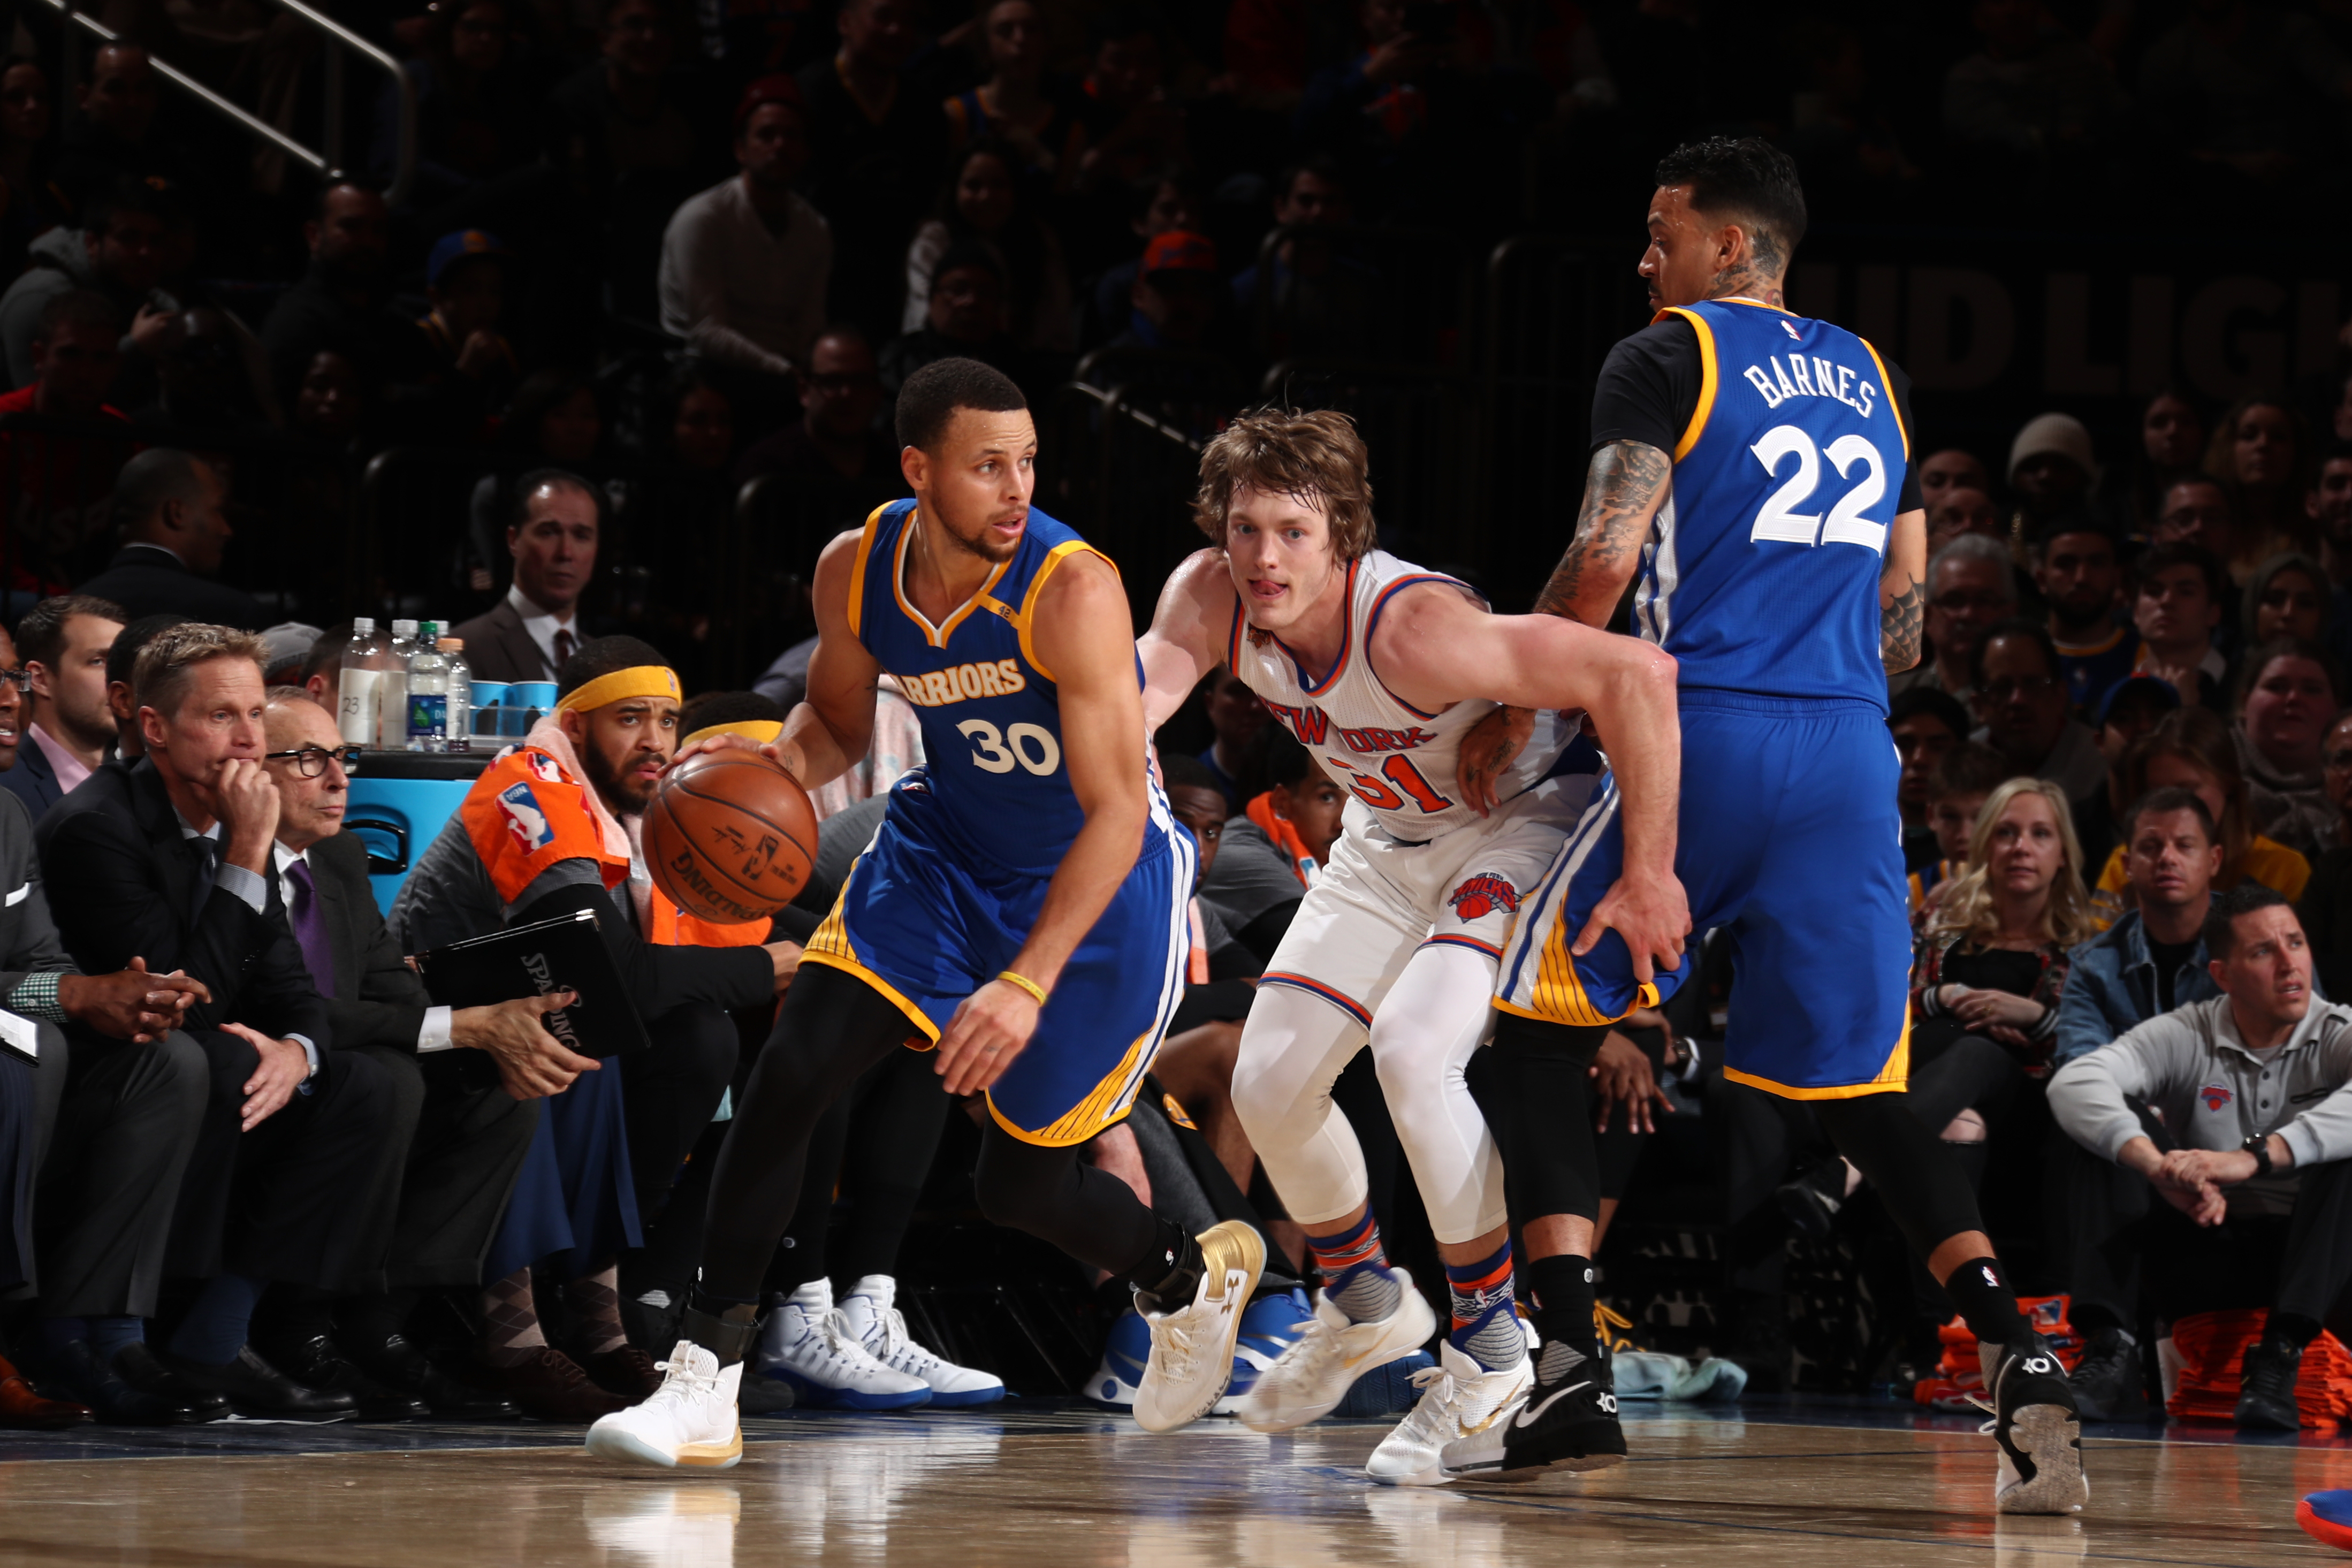 NEW YORK, NY - MARCH 5: Stephen Curry #30 of the Golden State Warriors handles the ball against the New York Knicks on March 5, 2017 at Madison Square Garden in New York City, New York. NOTE TO USER: User expressly acknowledges and agrees that, by downloading and or using this photograph, User is consenting to the terms and conditions of the Getty Images License Agreement. Mandatory Copyright Notice: Copyright 2017 NBAE (Photo by Nathaniel S. Butler/NBAE via Getty Images)